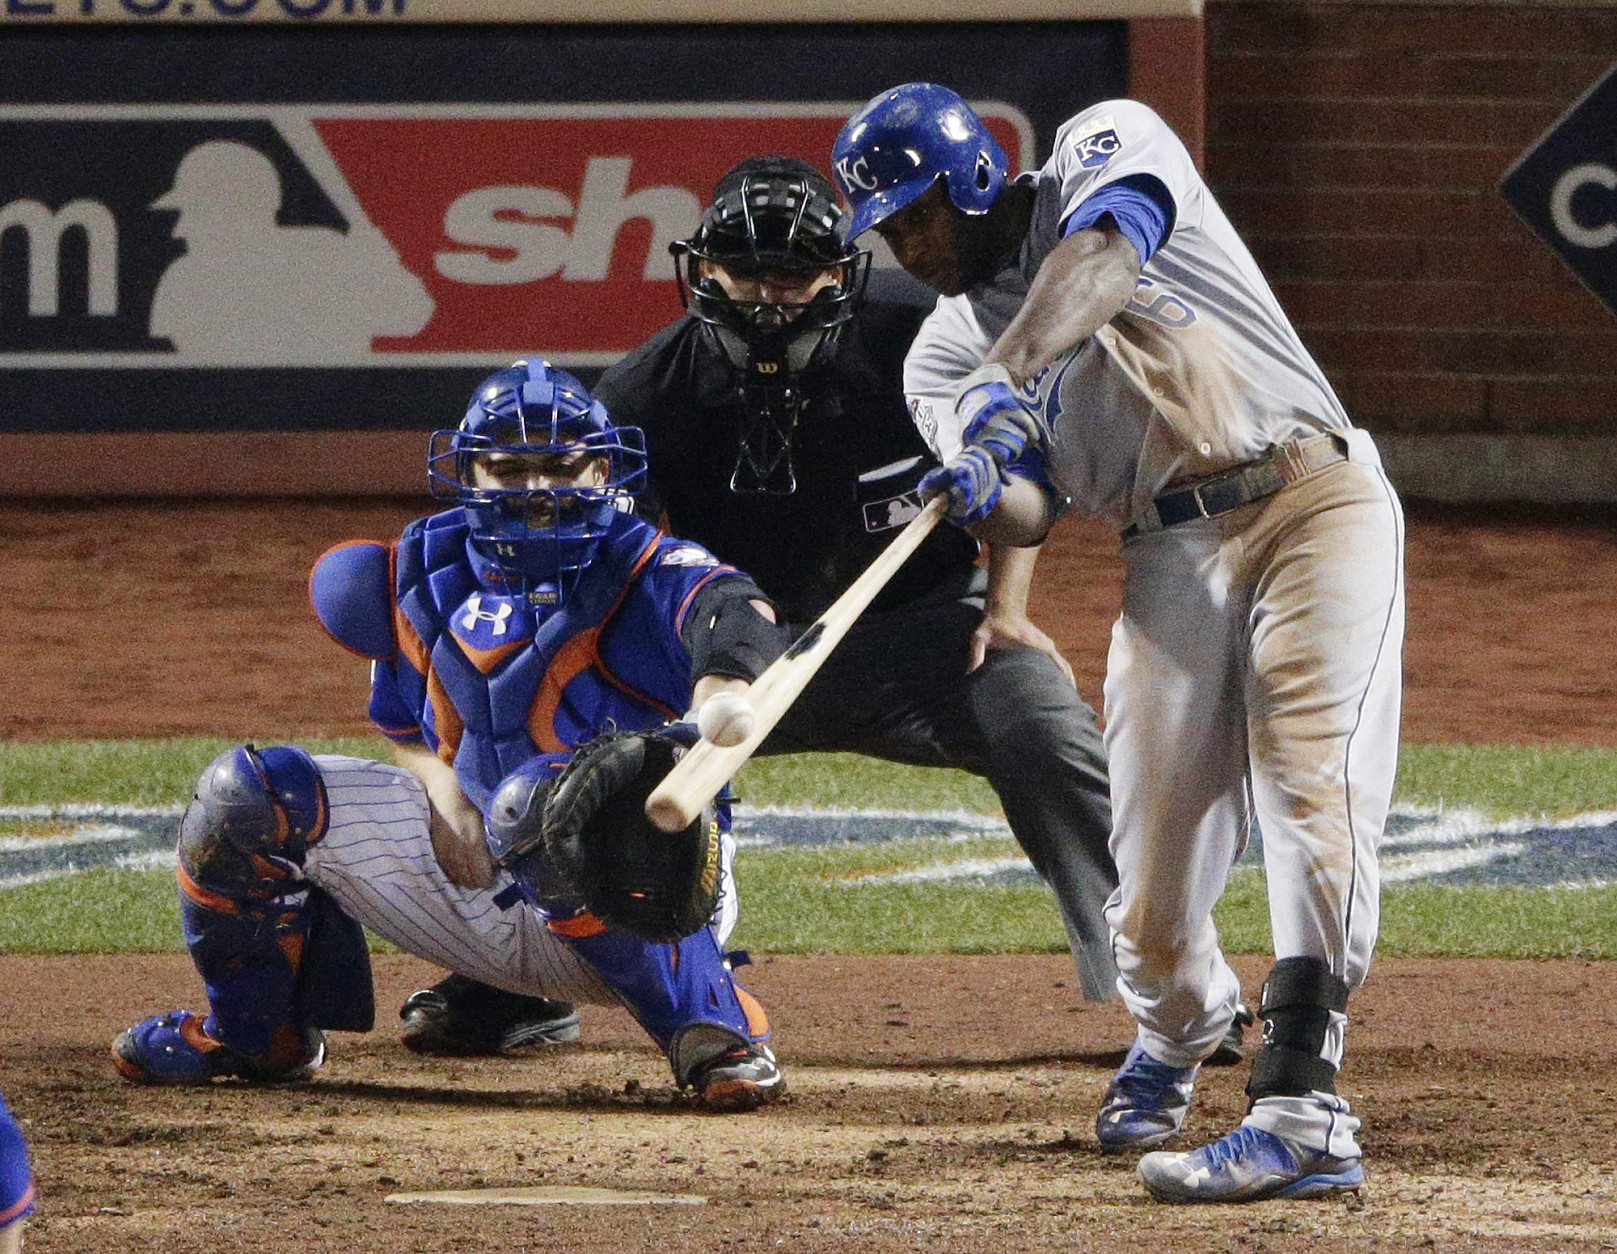 Kansas City Royals' Lorenzo Cain hits a three run double against the New York Mets during the 12th inning of Game 5 of the Major League Baseball World Series Monday, Nov. 2, 2015, in New York. (AP Photo/Charlie Riedel)